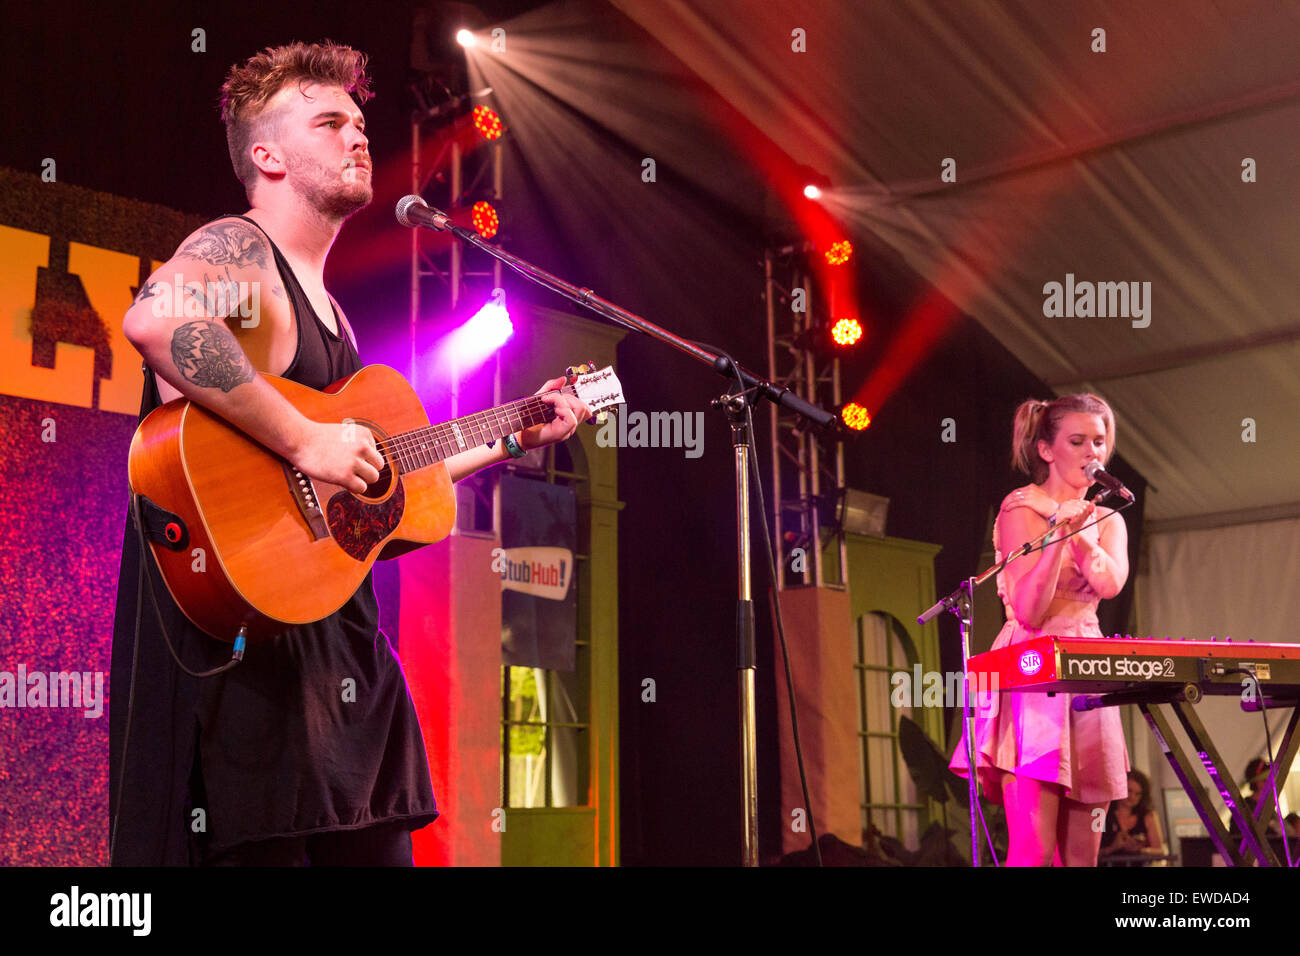 Dover, Deleware, USA. 21st June, 2015. Siblings CALEB NOTT (L) and GEORGIA NOTT of Broods perform an acoustic set on stage at the Firefly Music Festival in Dover, Delaware © Daniel DeSlover/ZUMA Wire/Alamy Live News Stock Photo